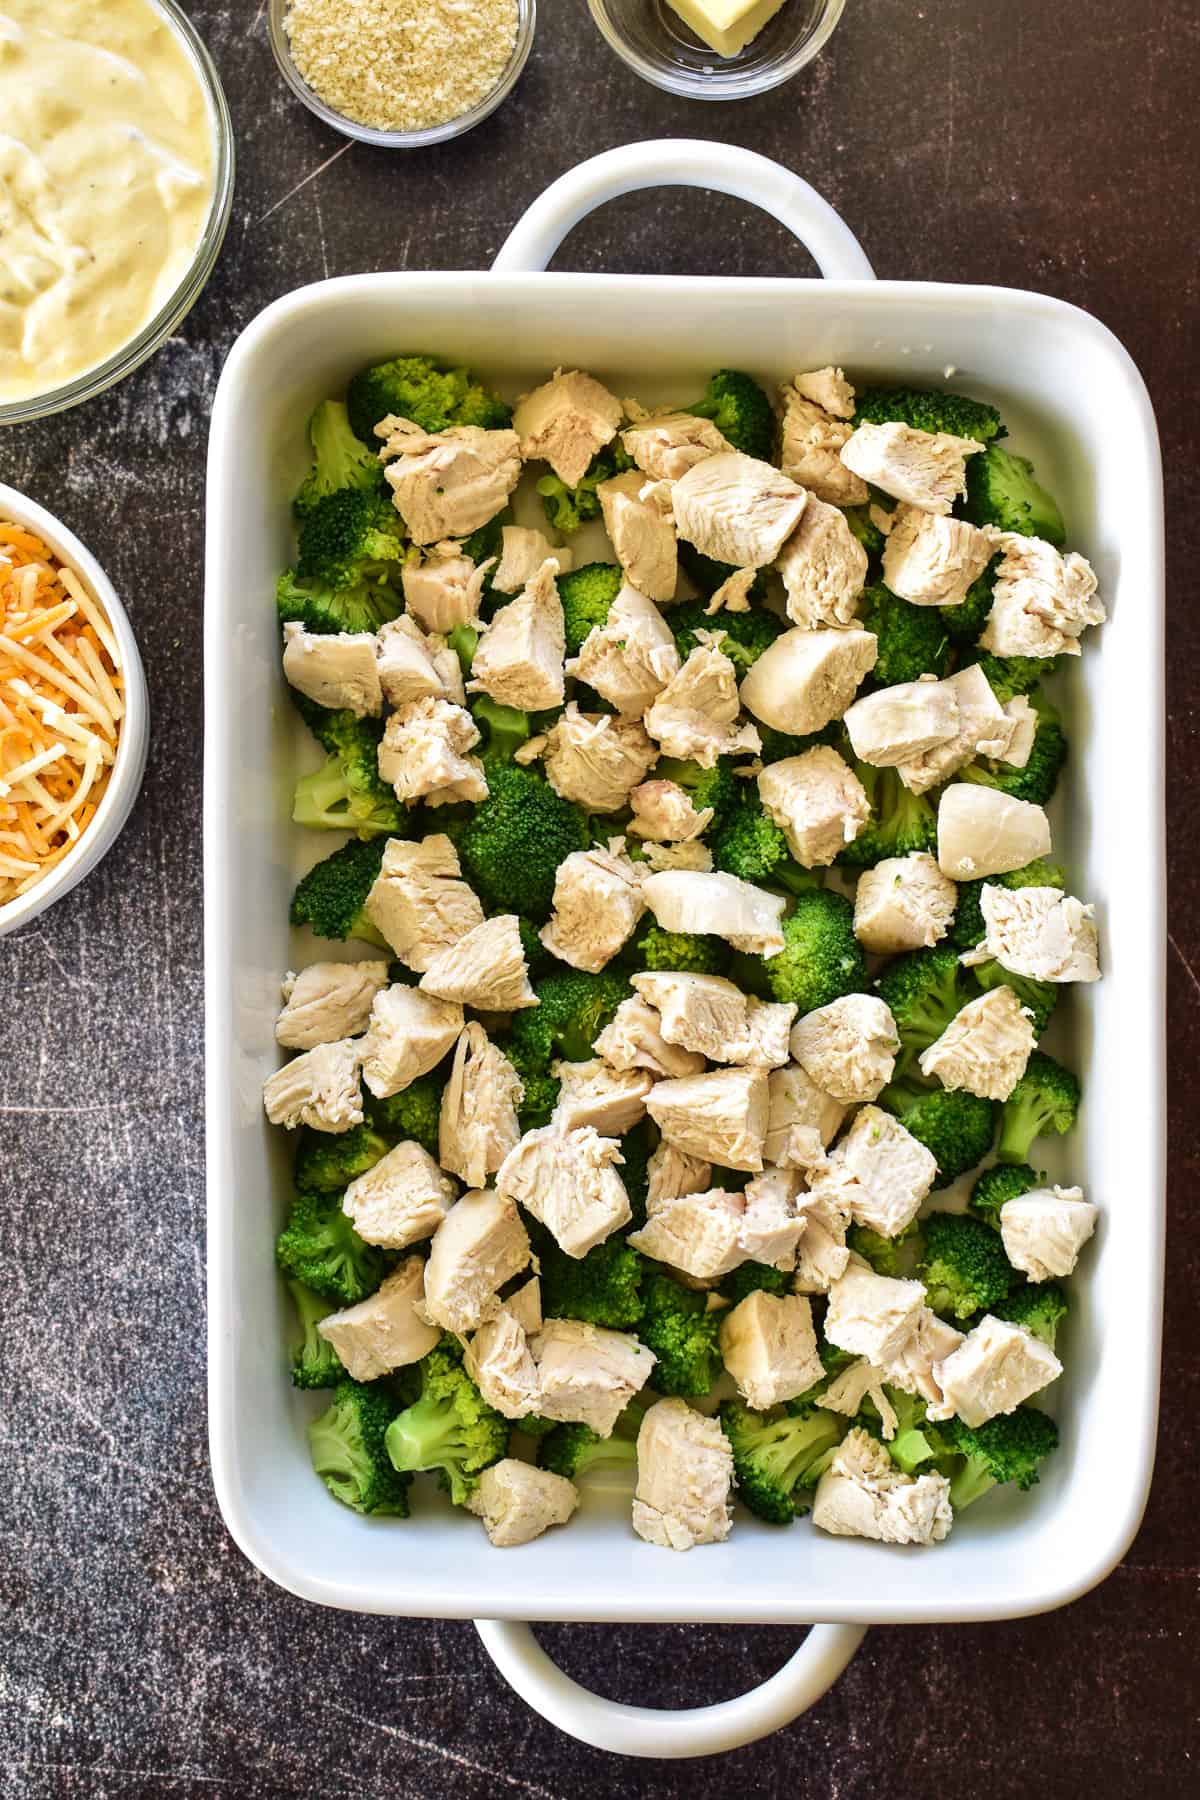 Chicken & broccoli layers in baking pan